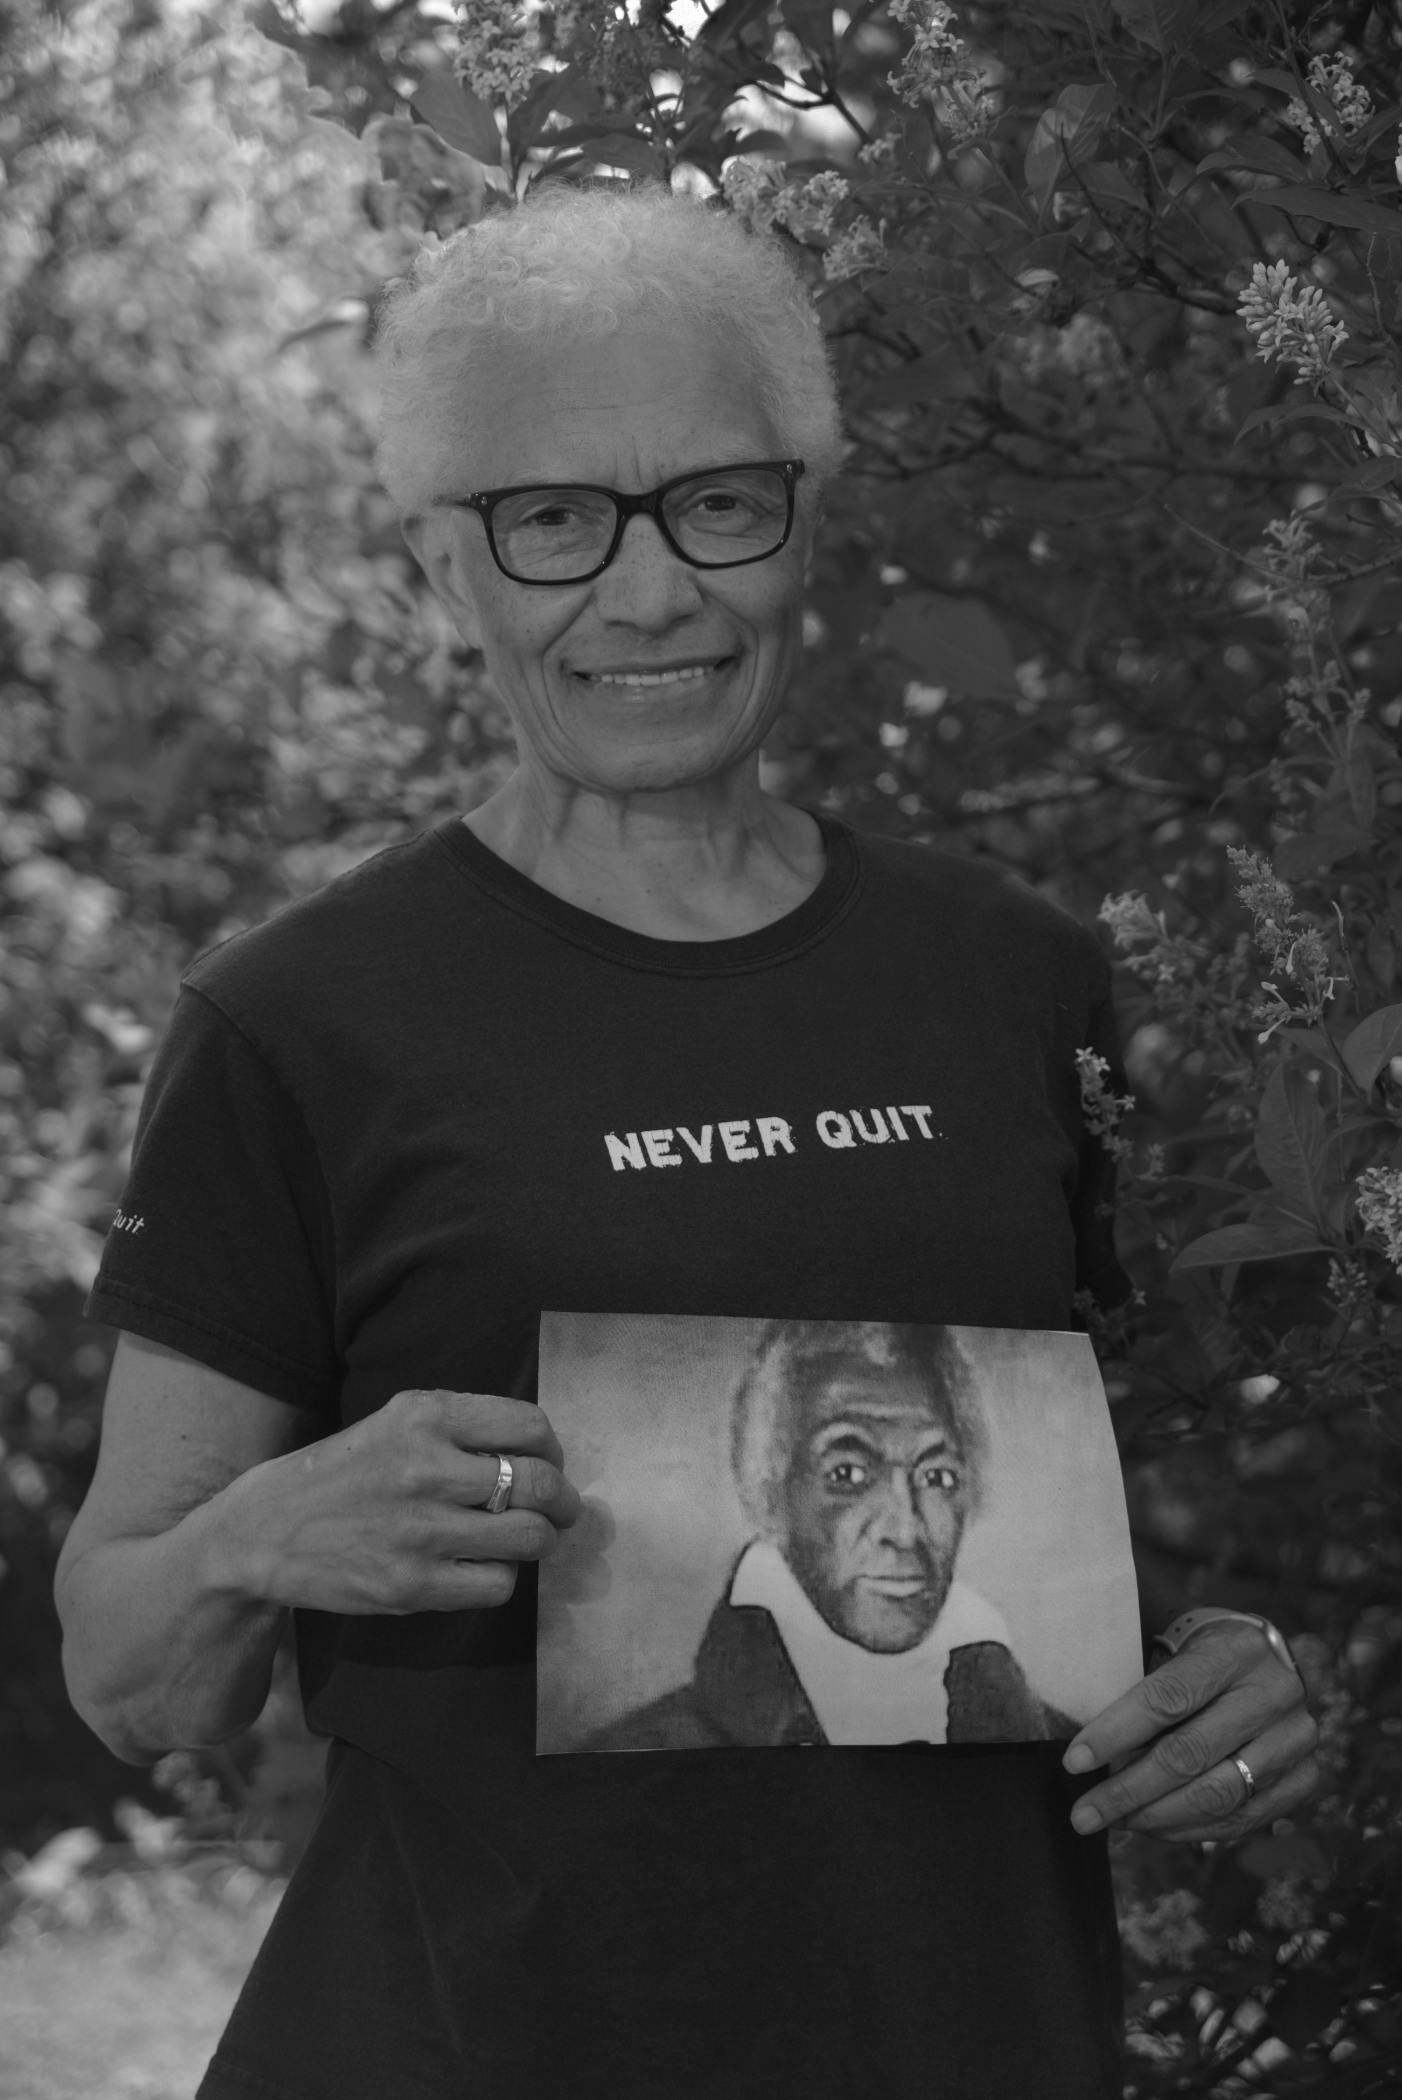 A short-haired woman with glasses holds a portrait of Black man